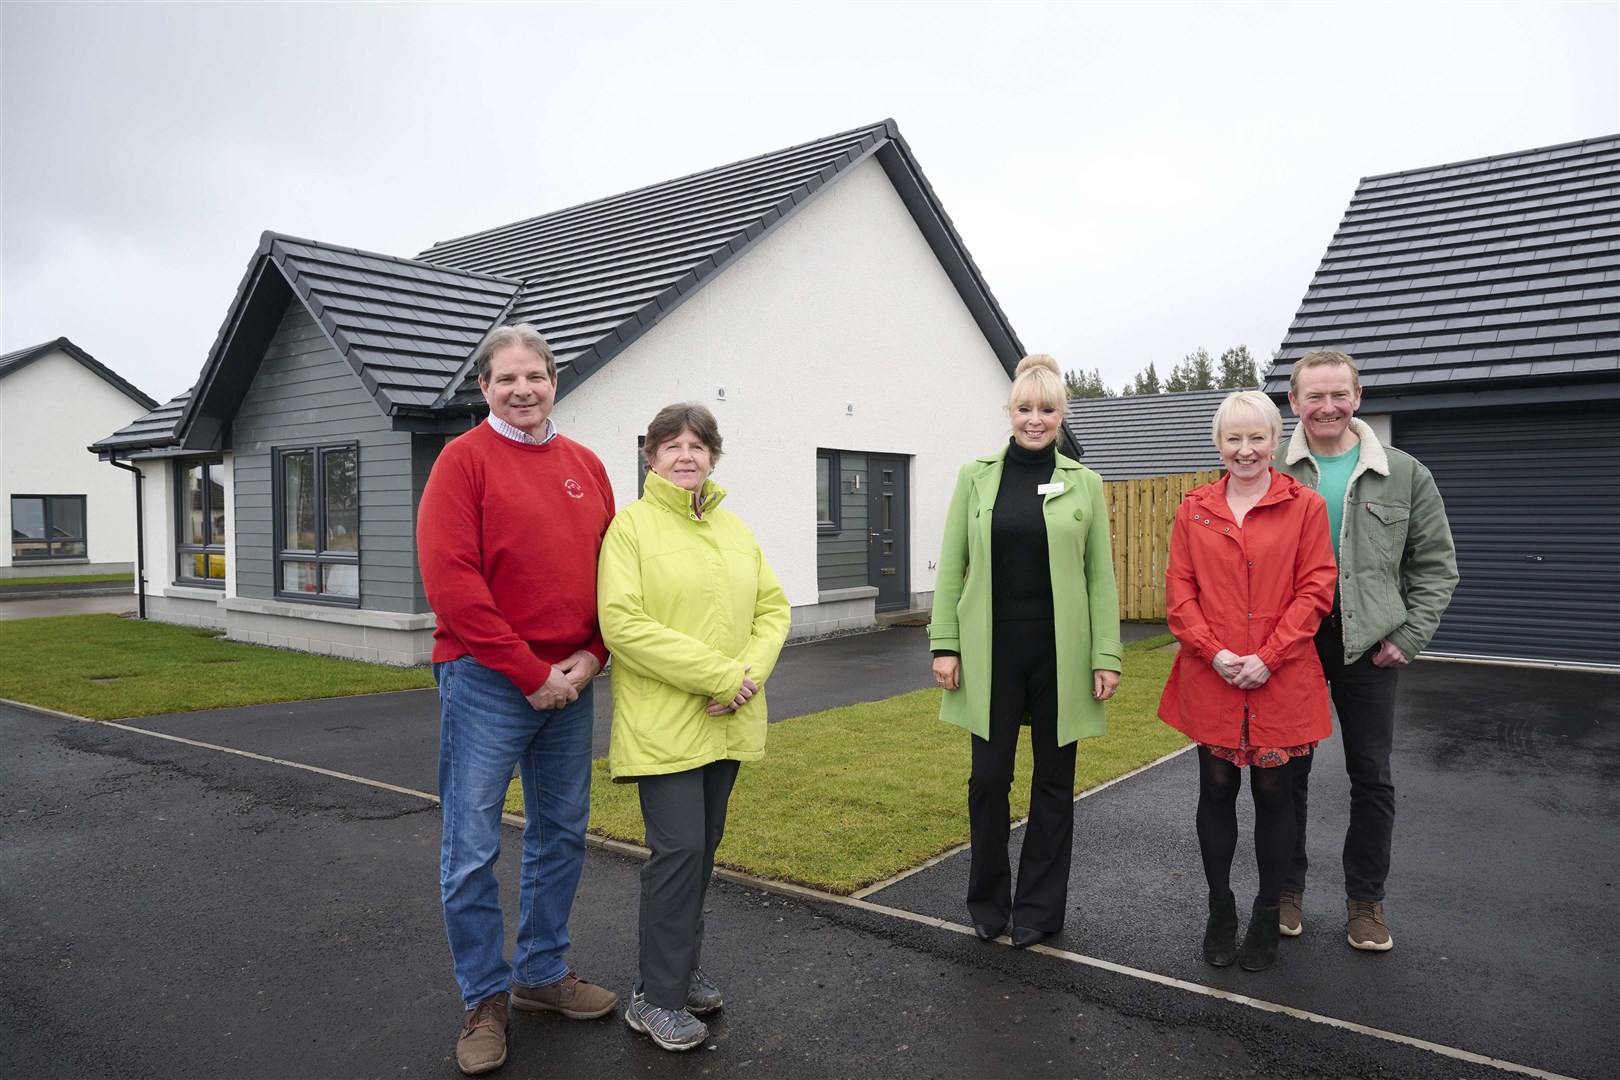 At the new homes are Jim Lachendro and Anne Sutherland; sales consultant Jacqui O’Rourke and Richard and Caroline Bell.